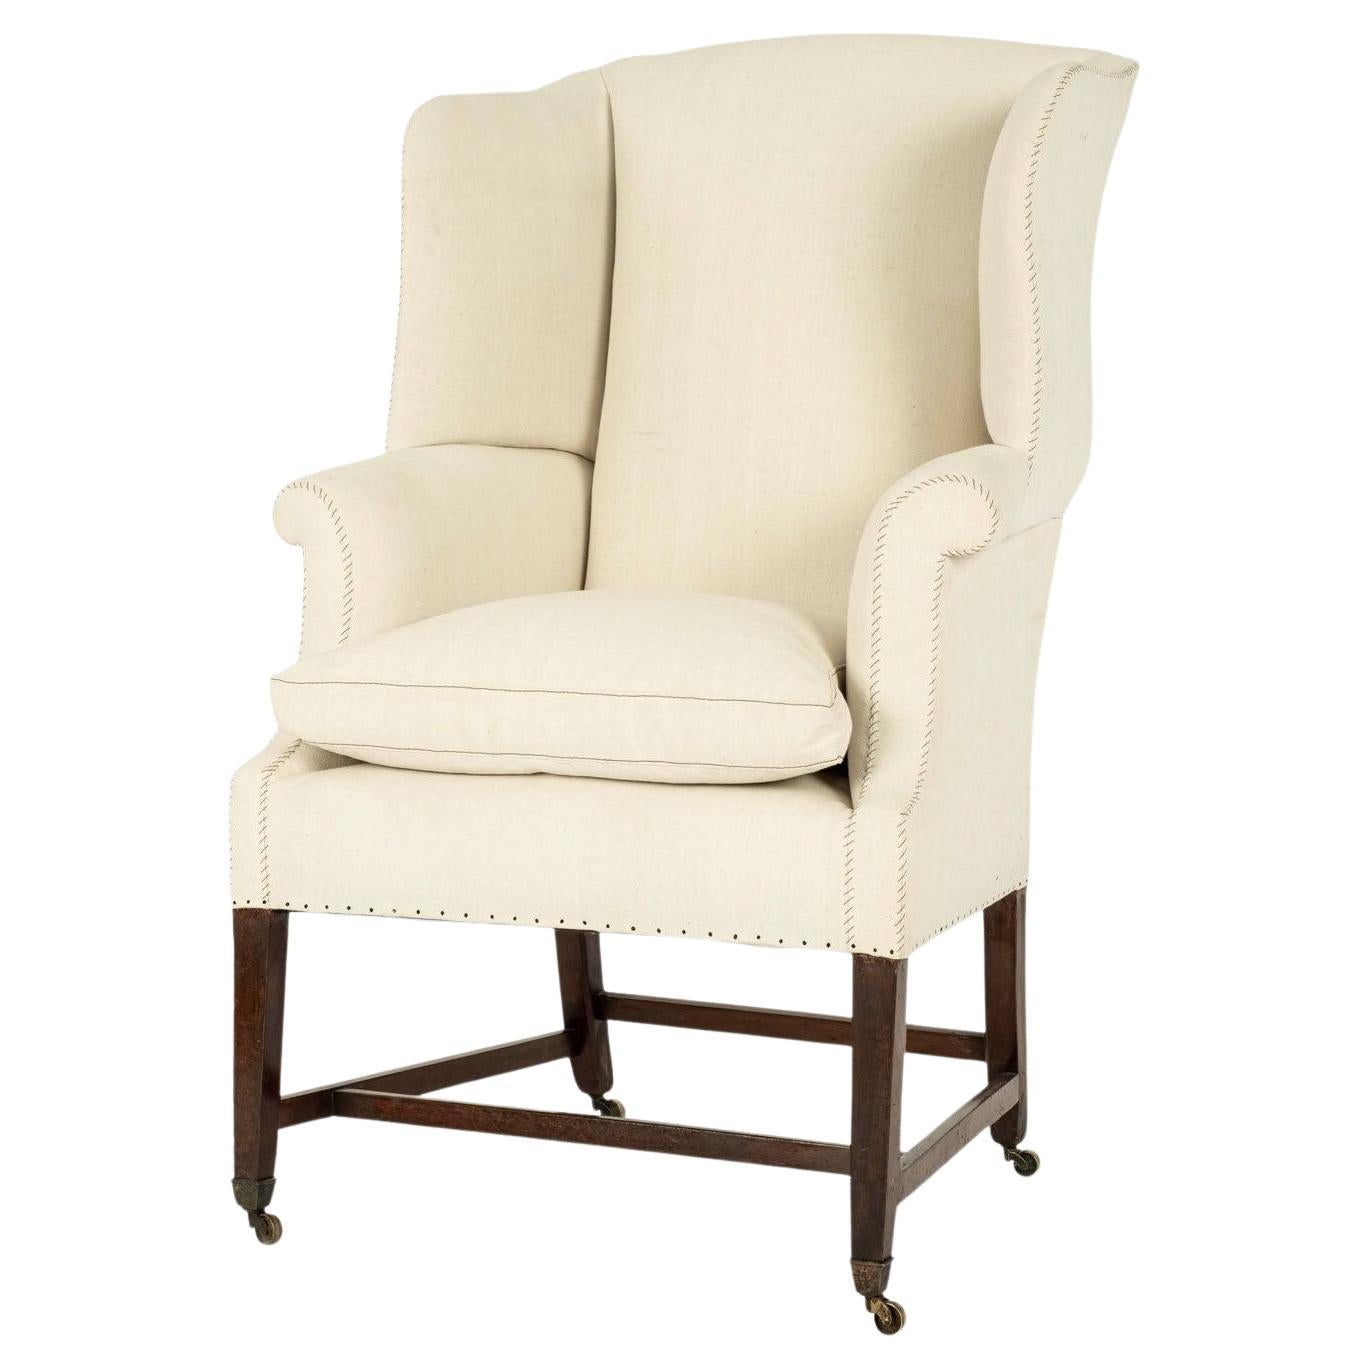 19th Century Wingback Upholstered in Antique Off-White Linen